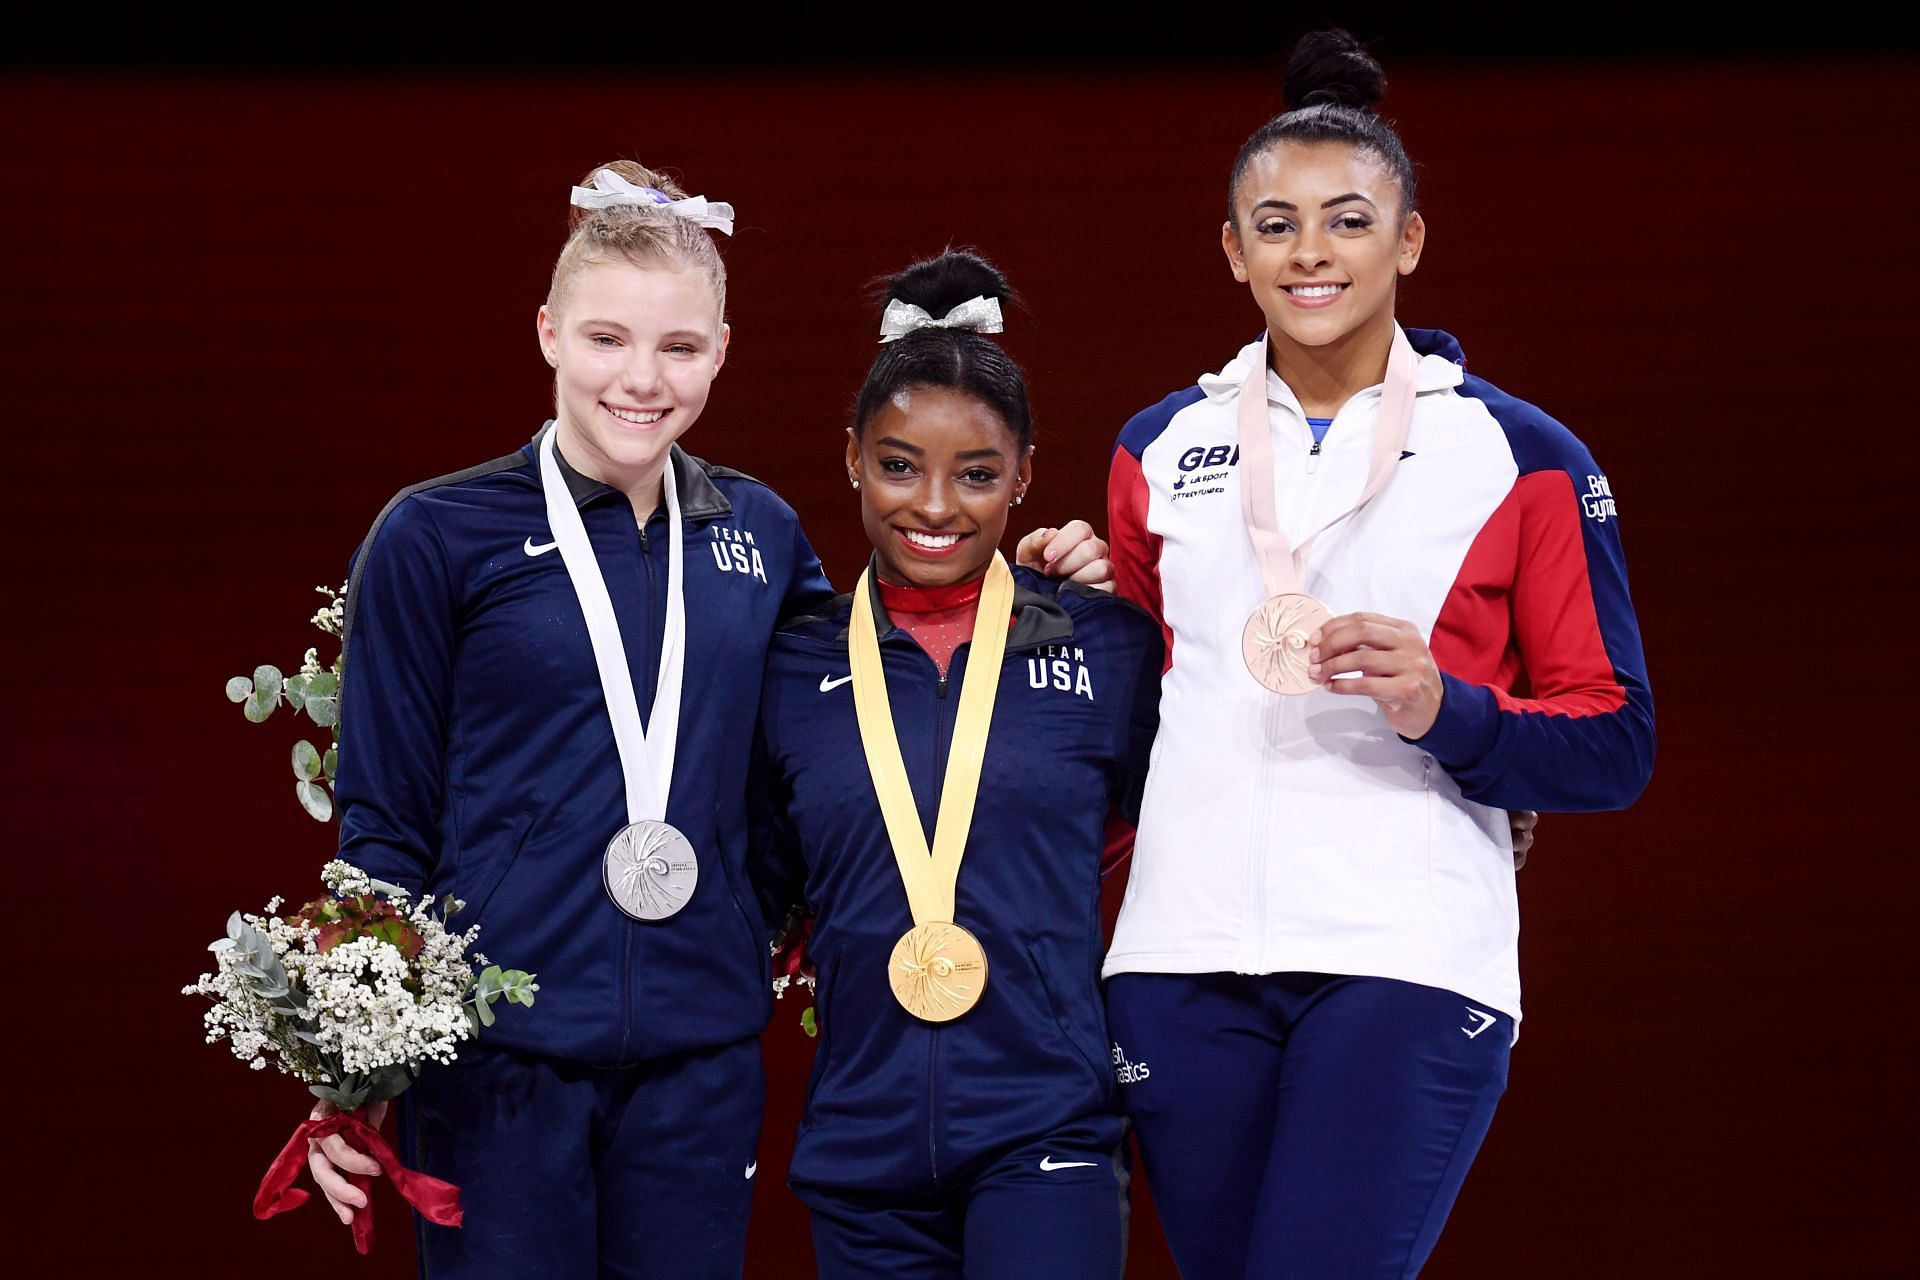 Simone Biles and Elissa Downie pose for a photo following Women&#039;s Vault Final at 49th FIG Artistic Gymnastics World Championships in 2019 